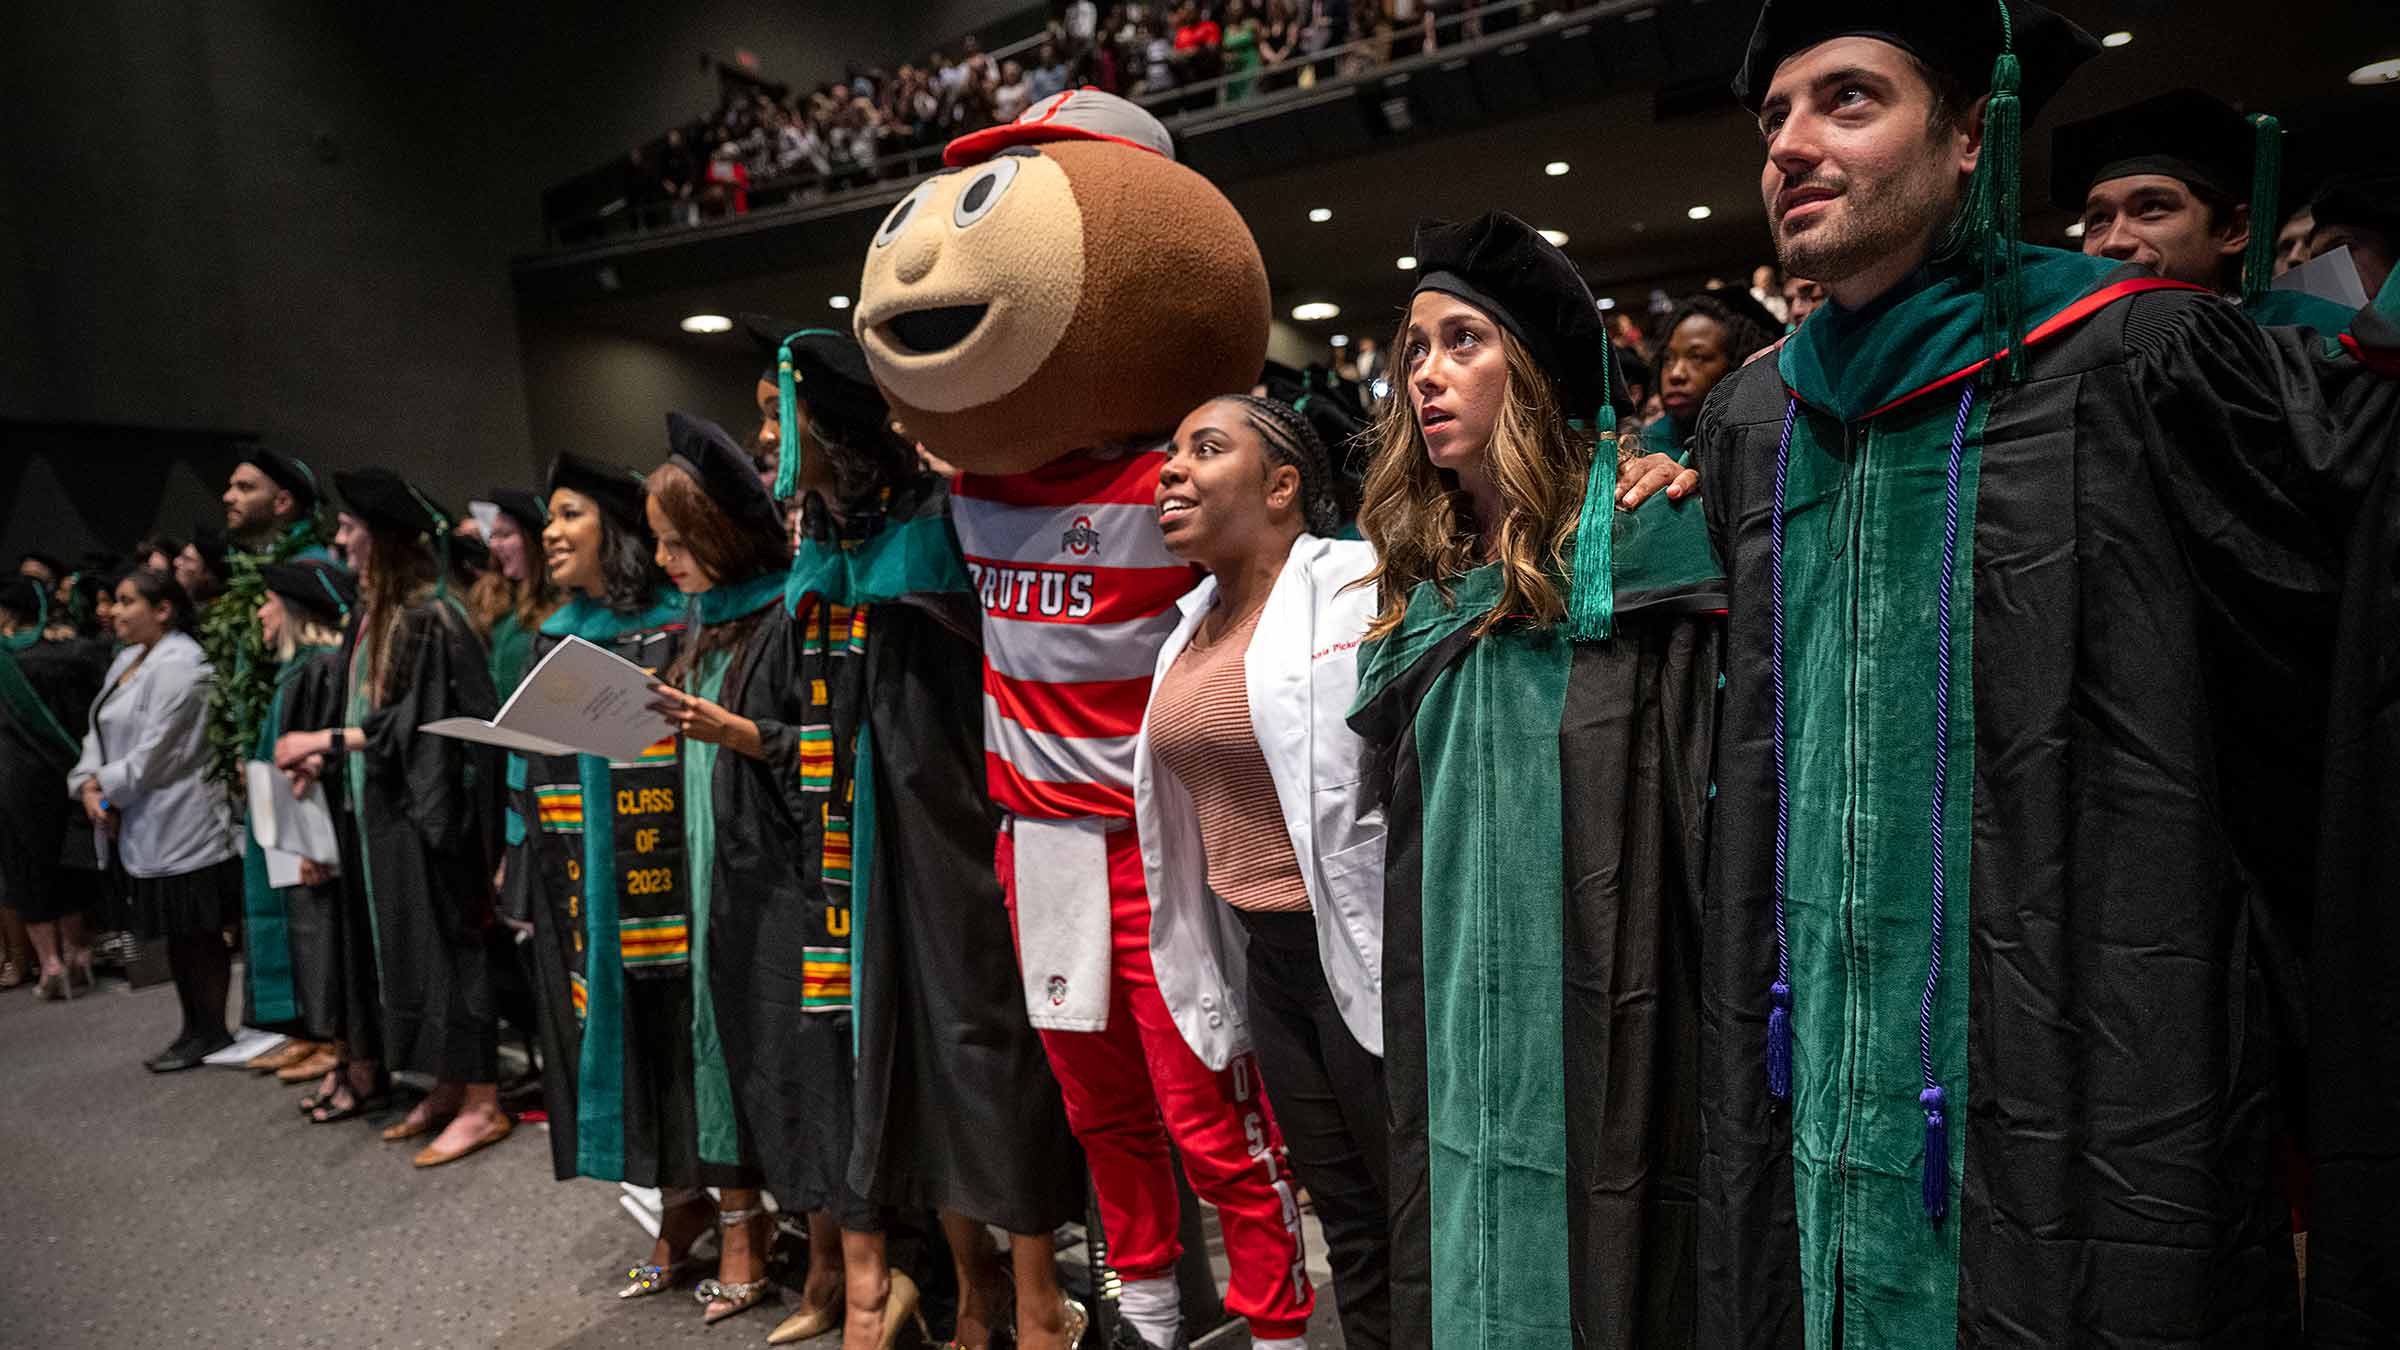 Medical students with interlocked arms sing the Ohio State alma mater at the Doctoral Convocation ceremony with Brutus